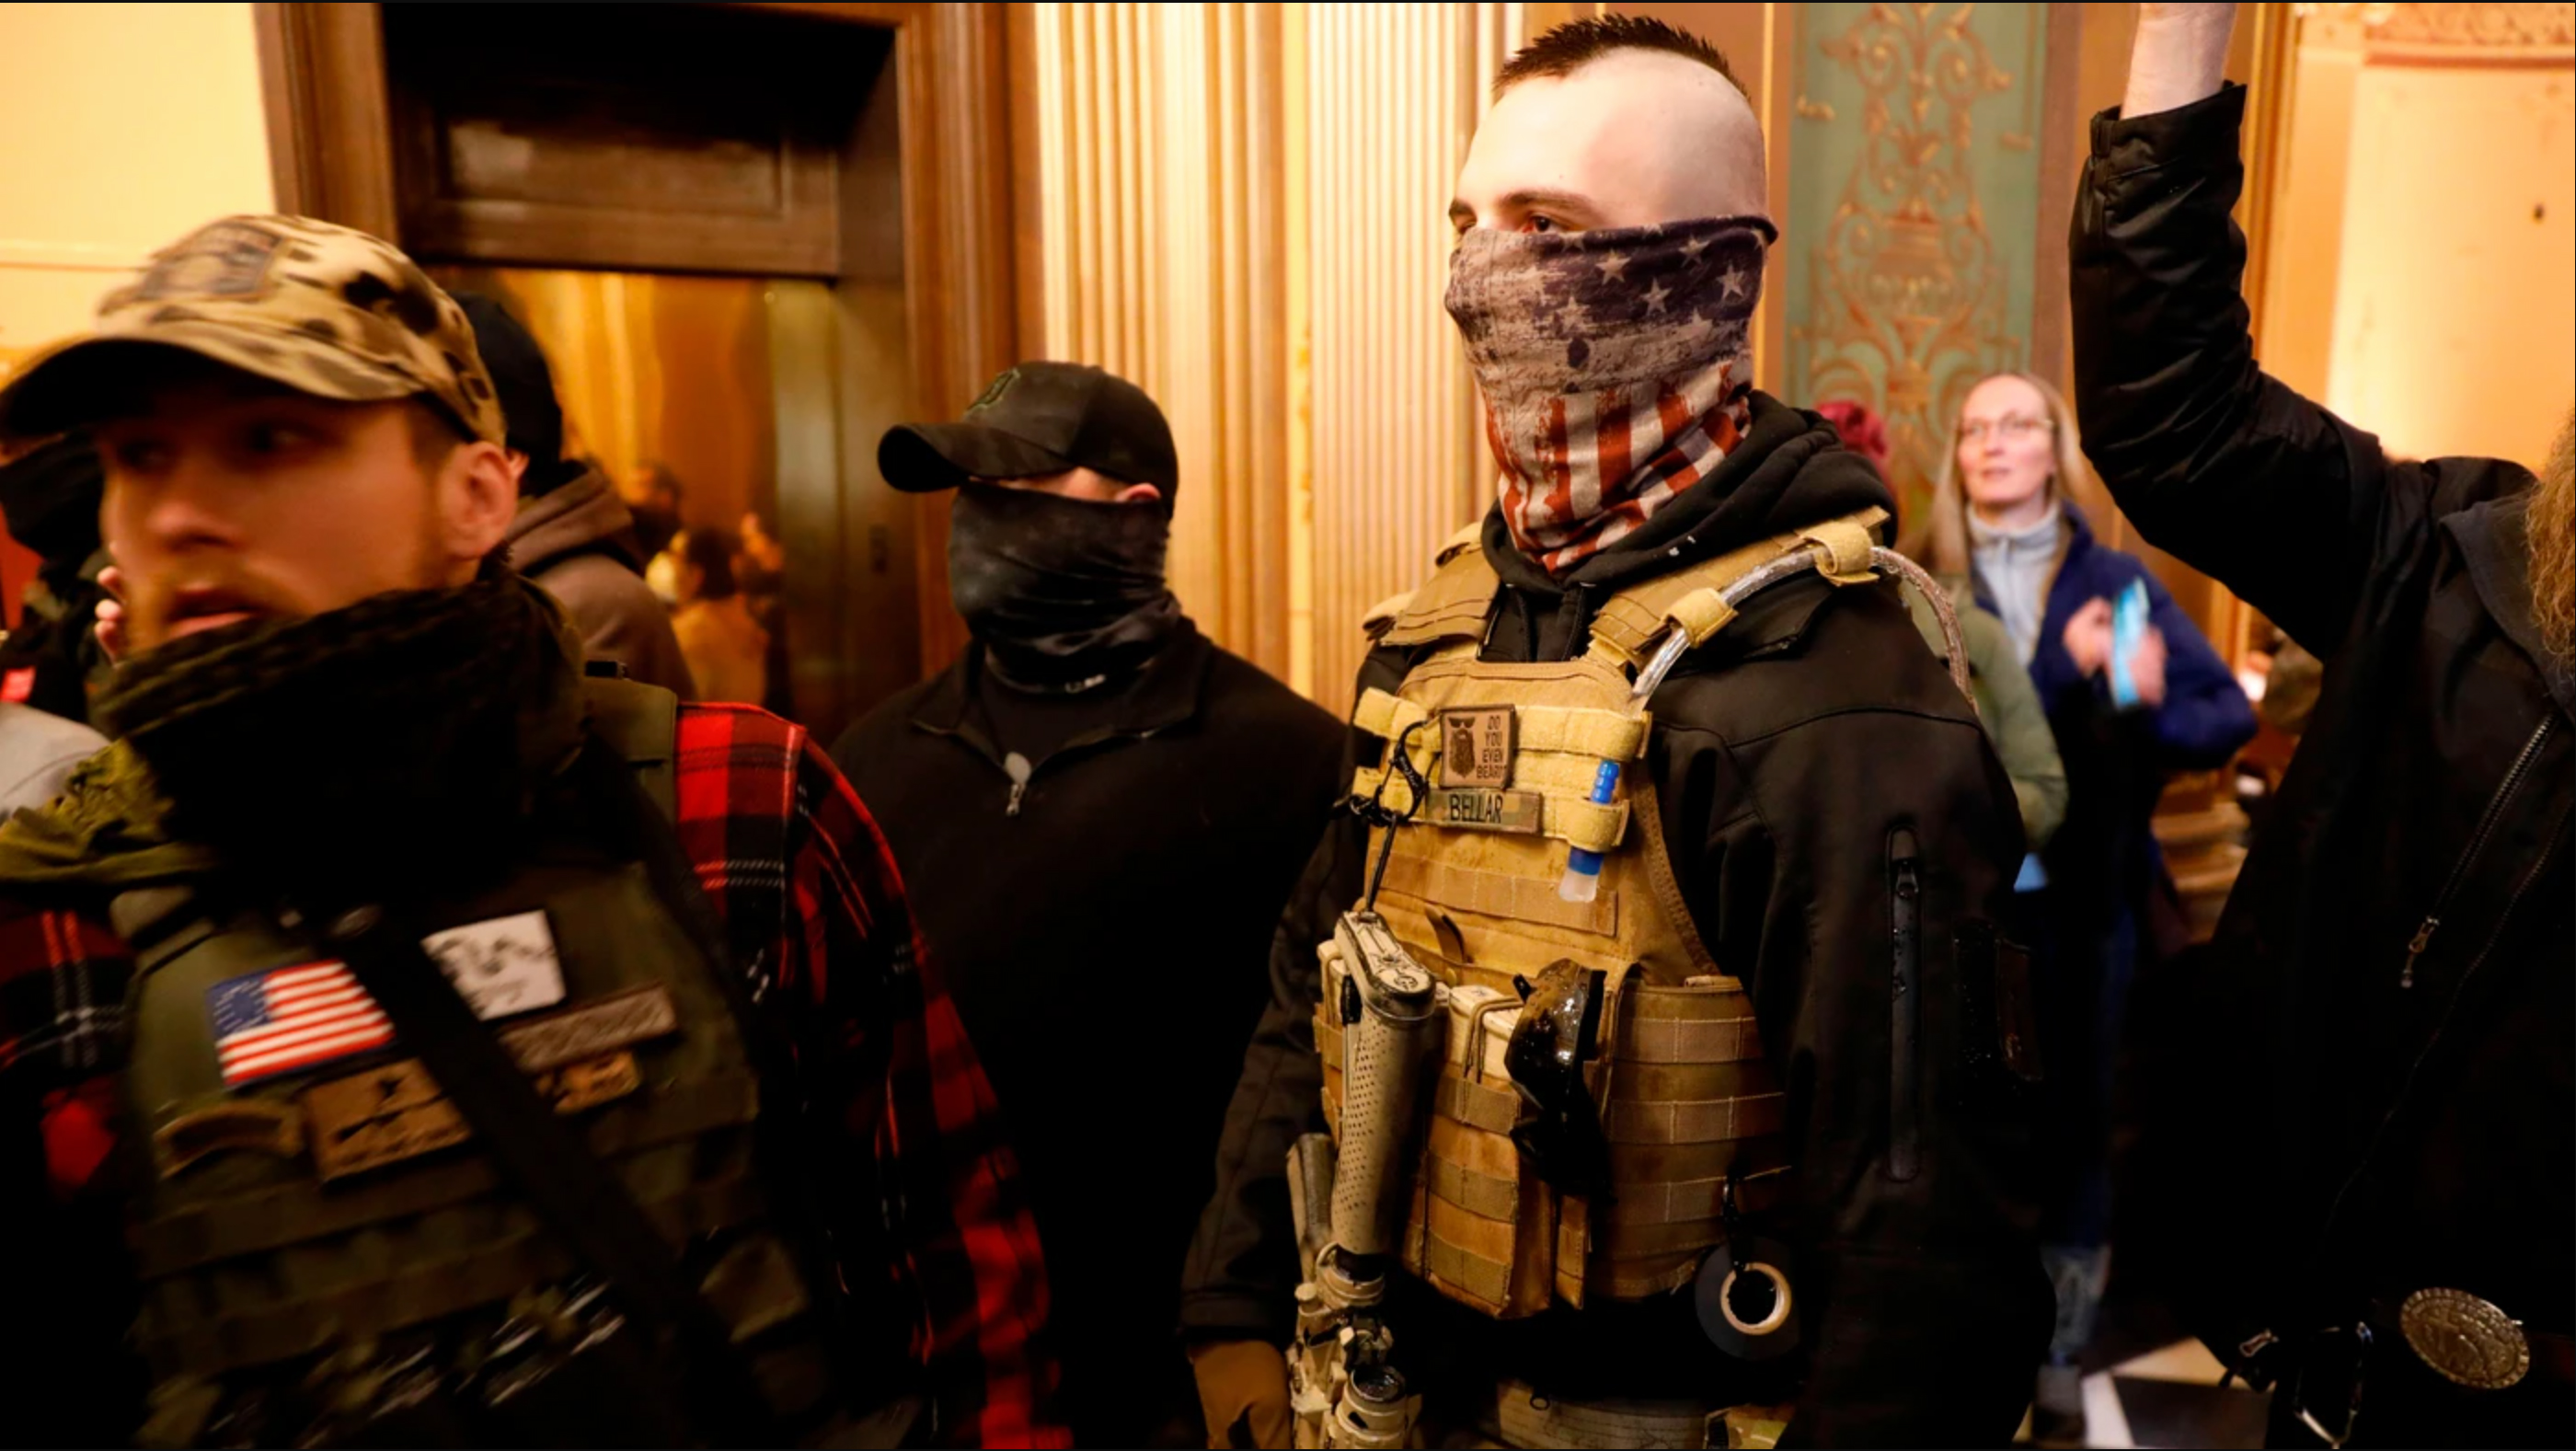 11 Most Intense Photos from Michigan Lockdown Protest Wtf Gallery